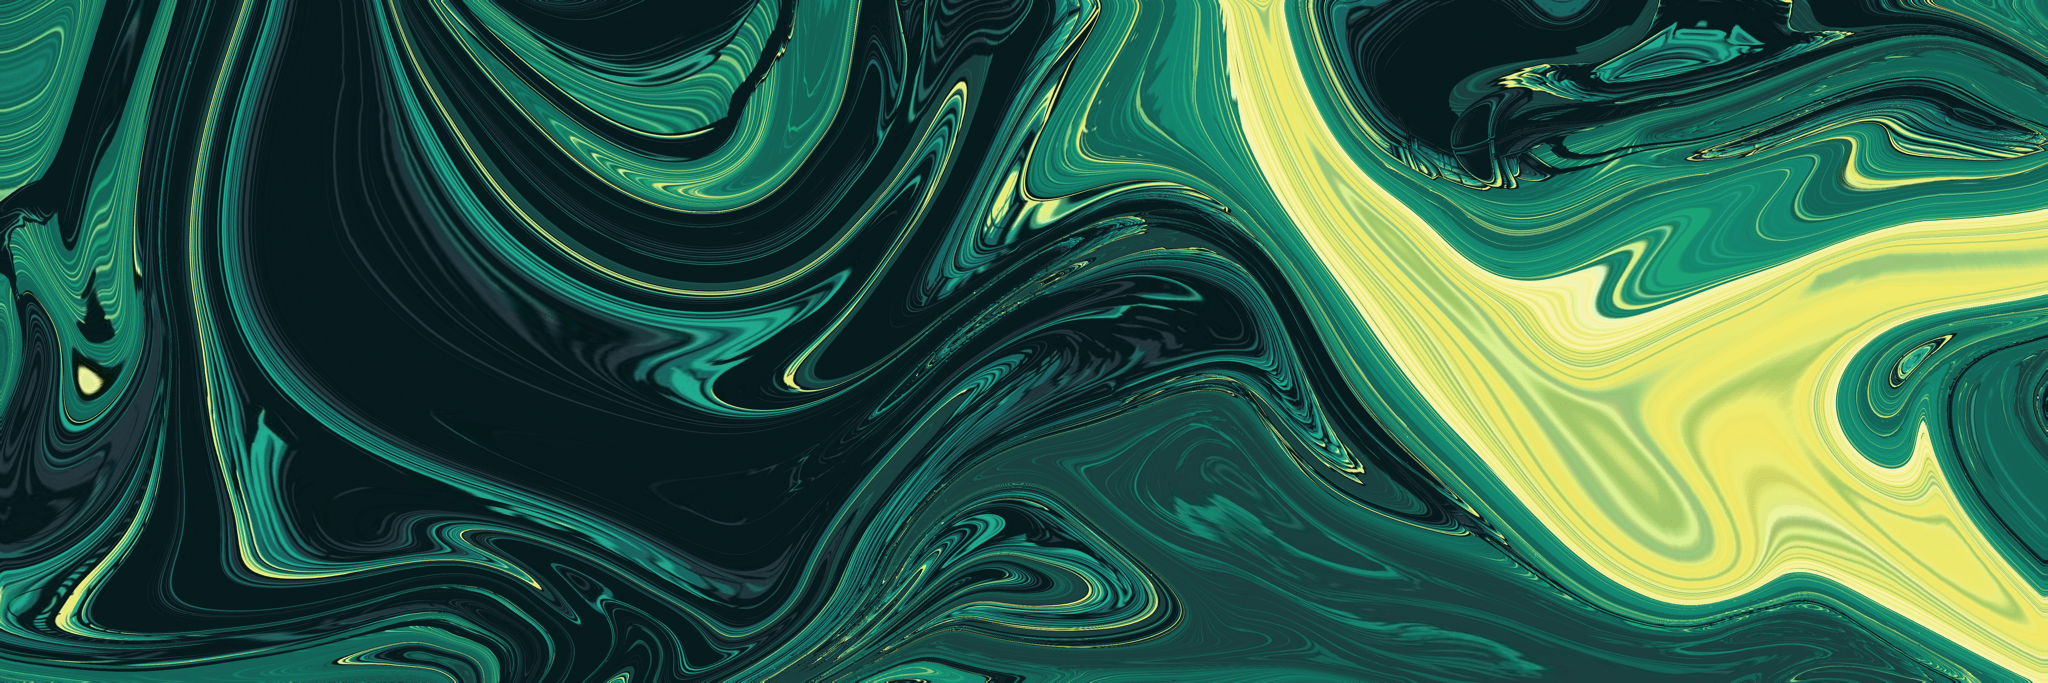 Wallpaper ID: 4759 / stains, liquid, wavy, abstraction, blue, 4k Wallpaper